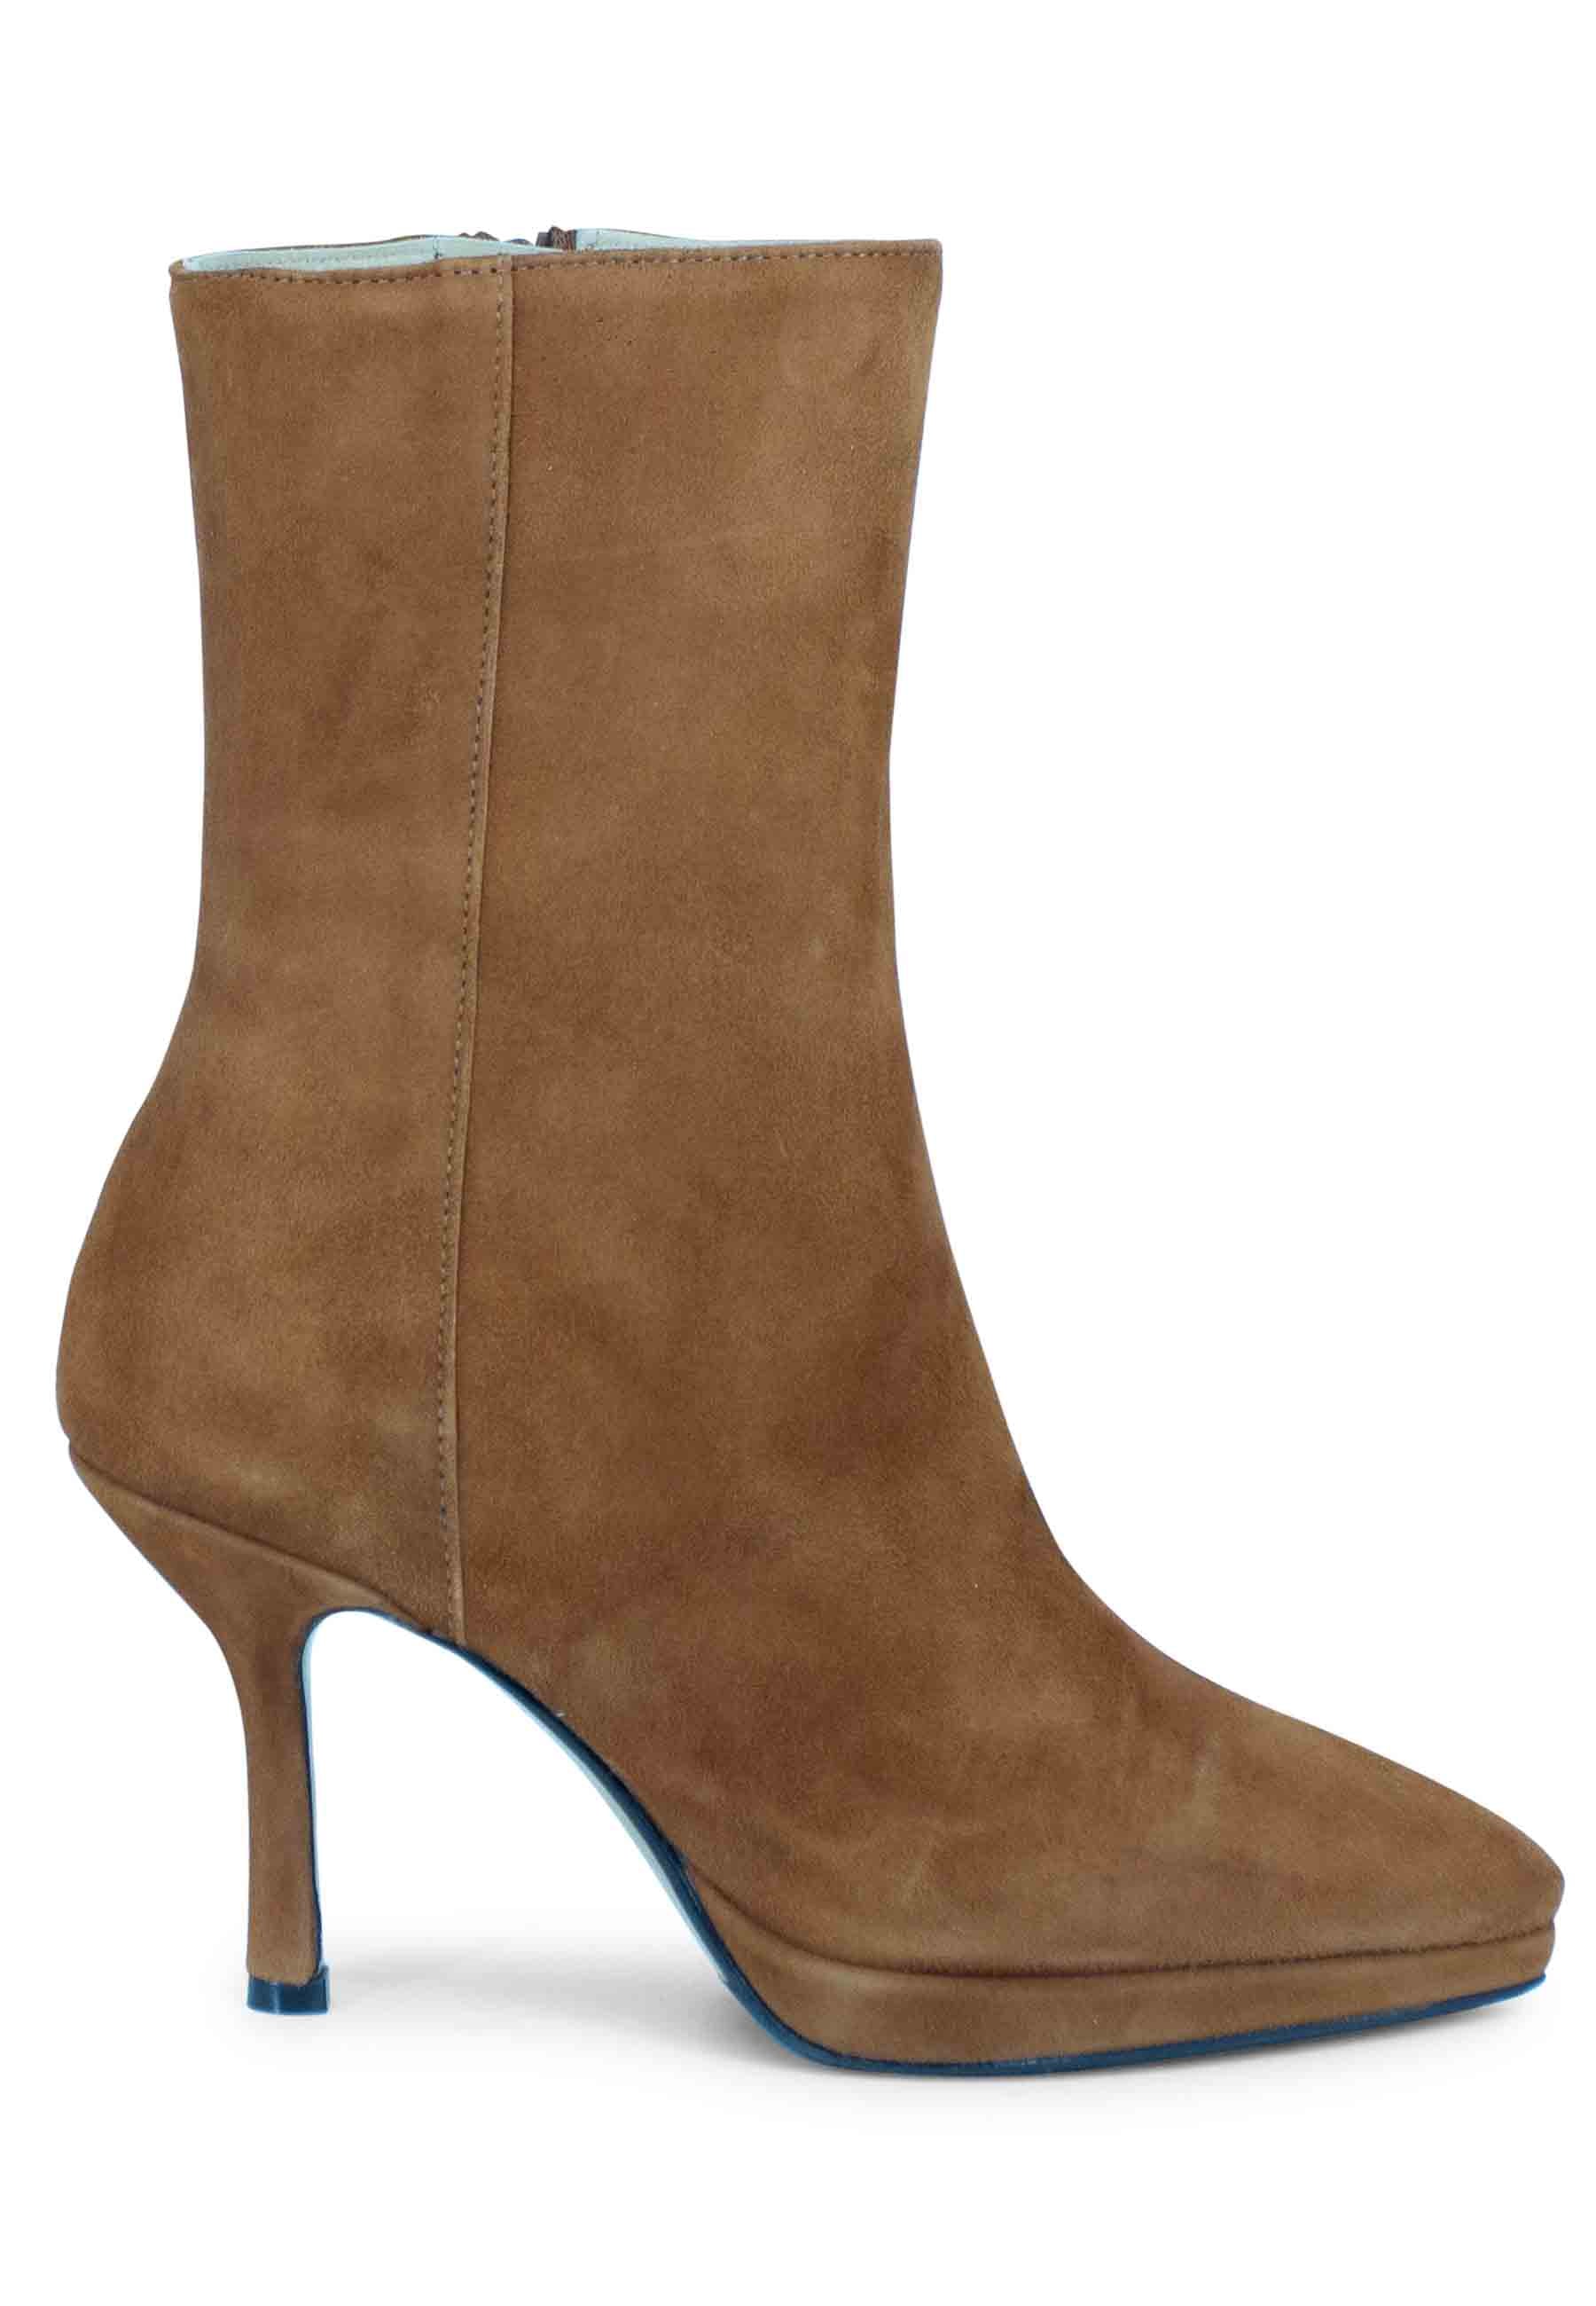 Women's ankle boots in leather suede with heel and platform